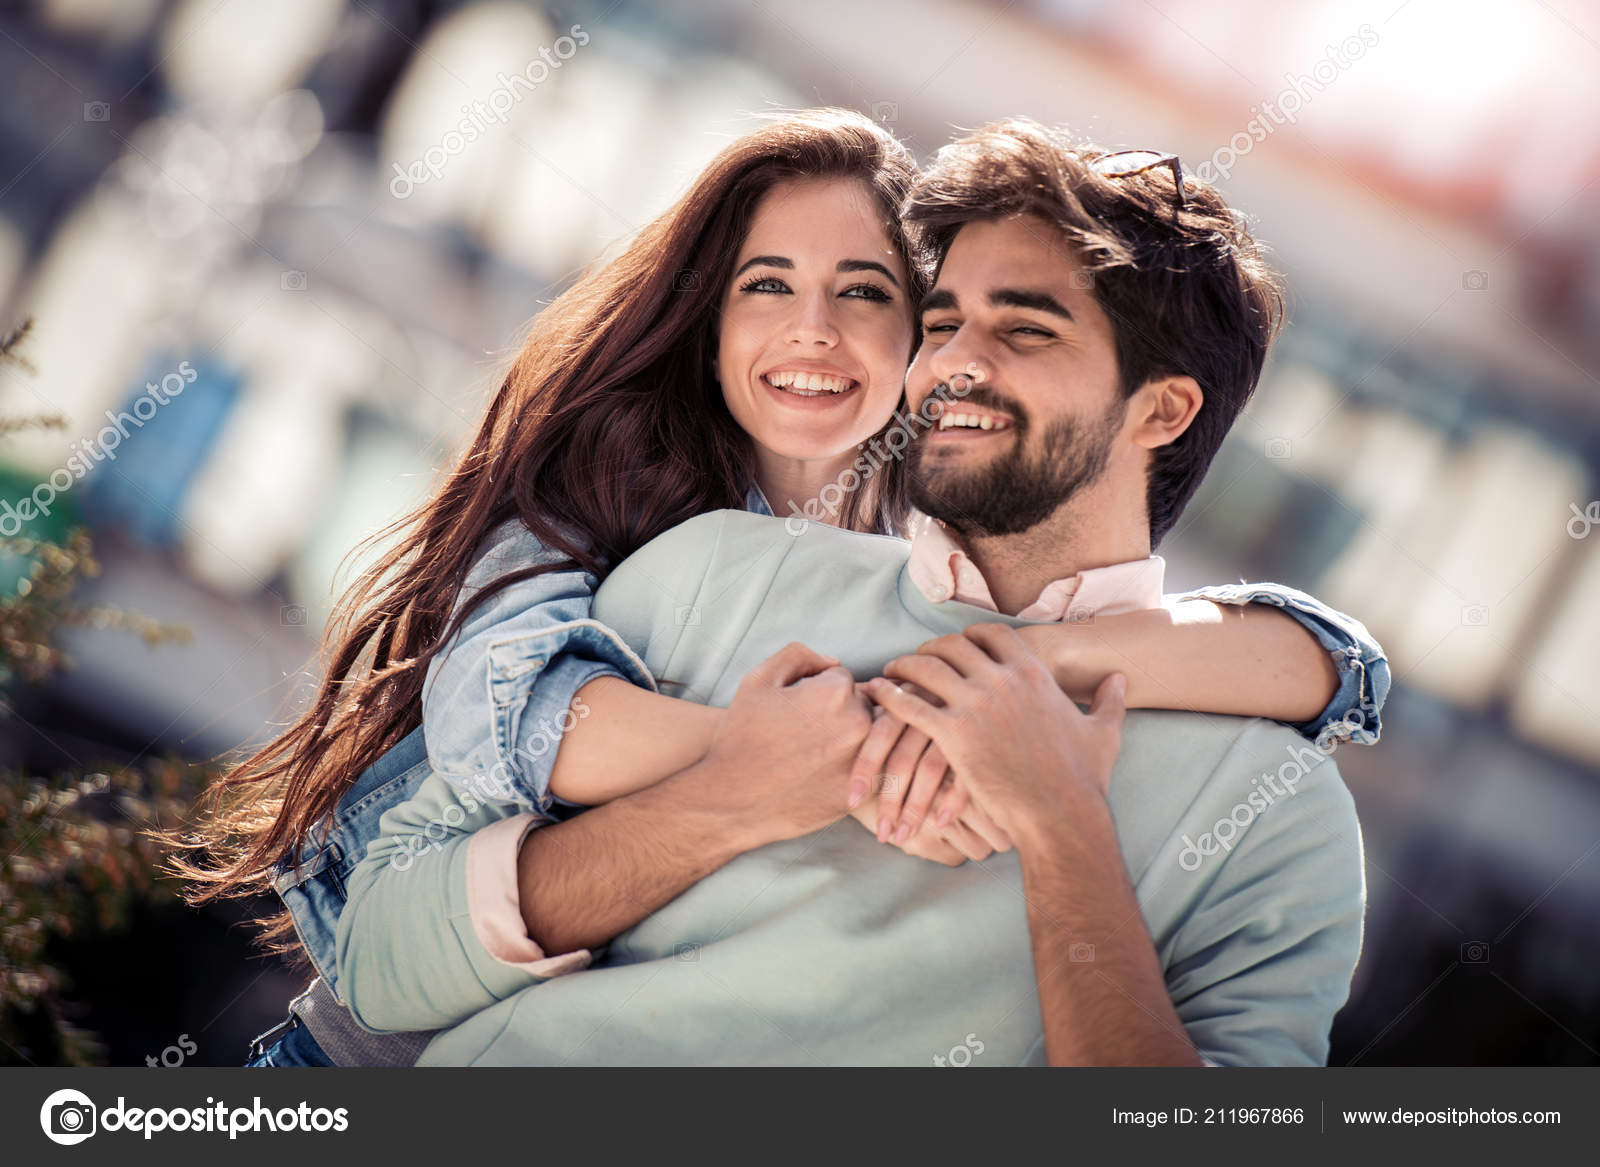 Smiling Couple Love Outdoors Young Happy Couple Hugging City ...